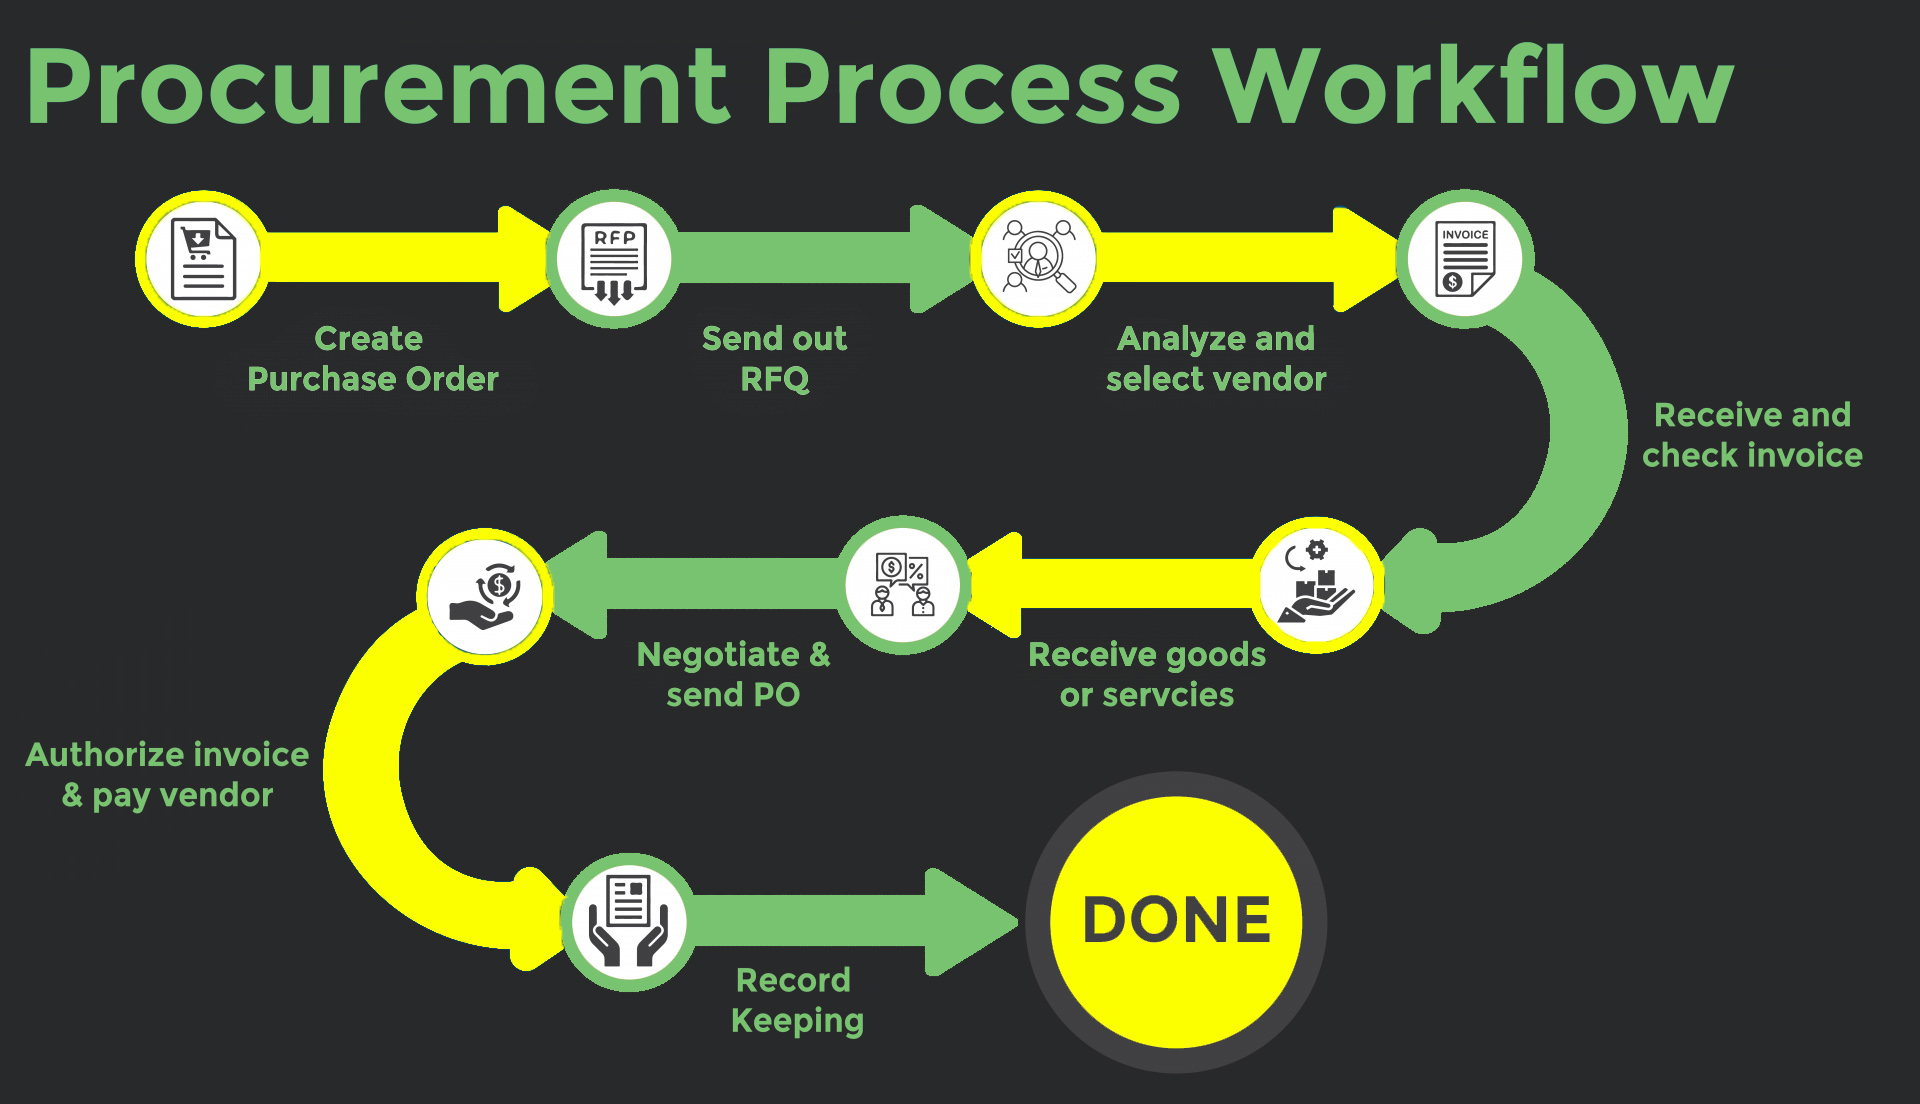 Procurement Process Workflow by Exceed ICT